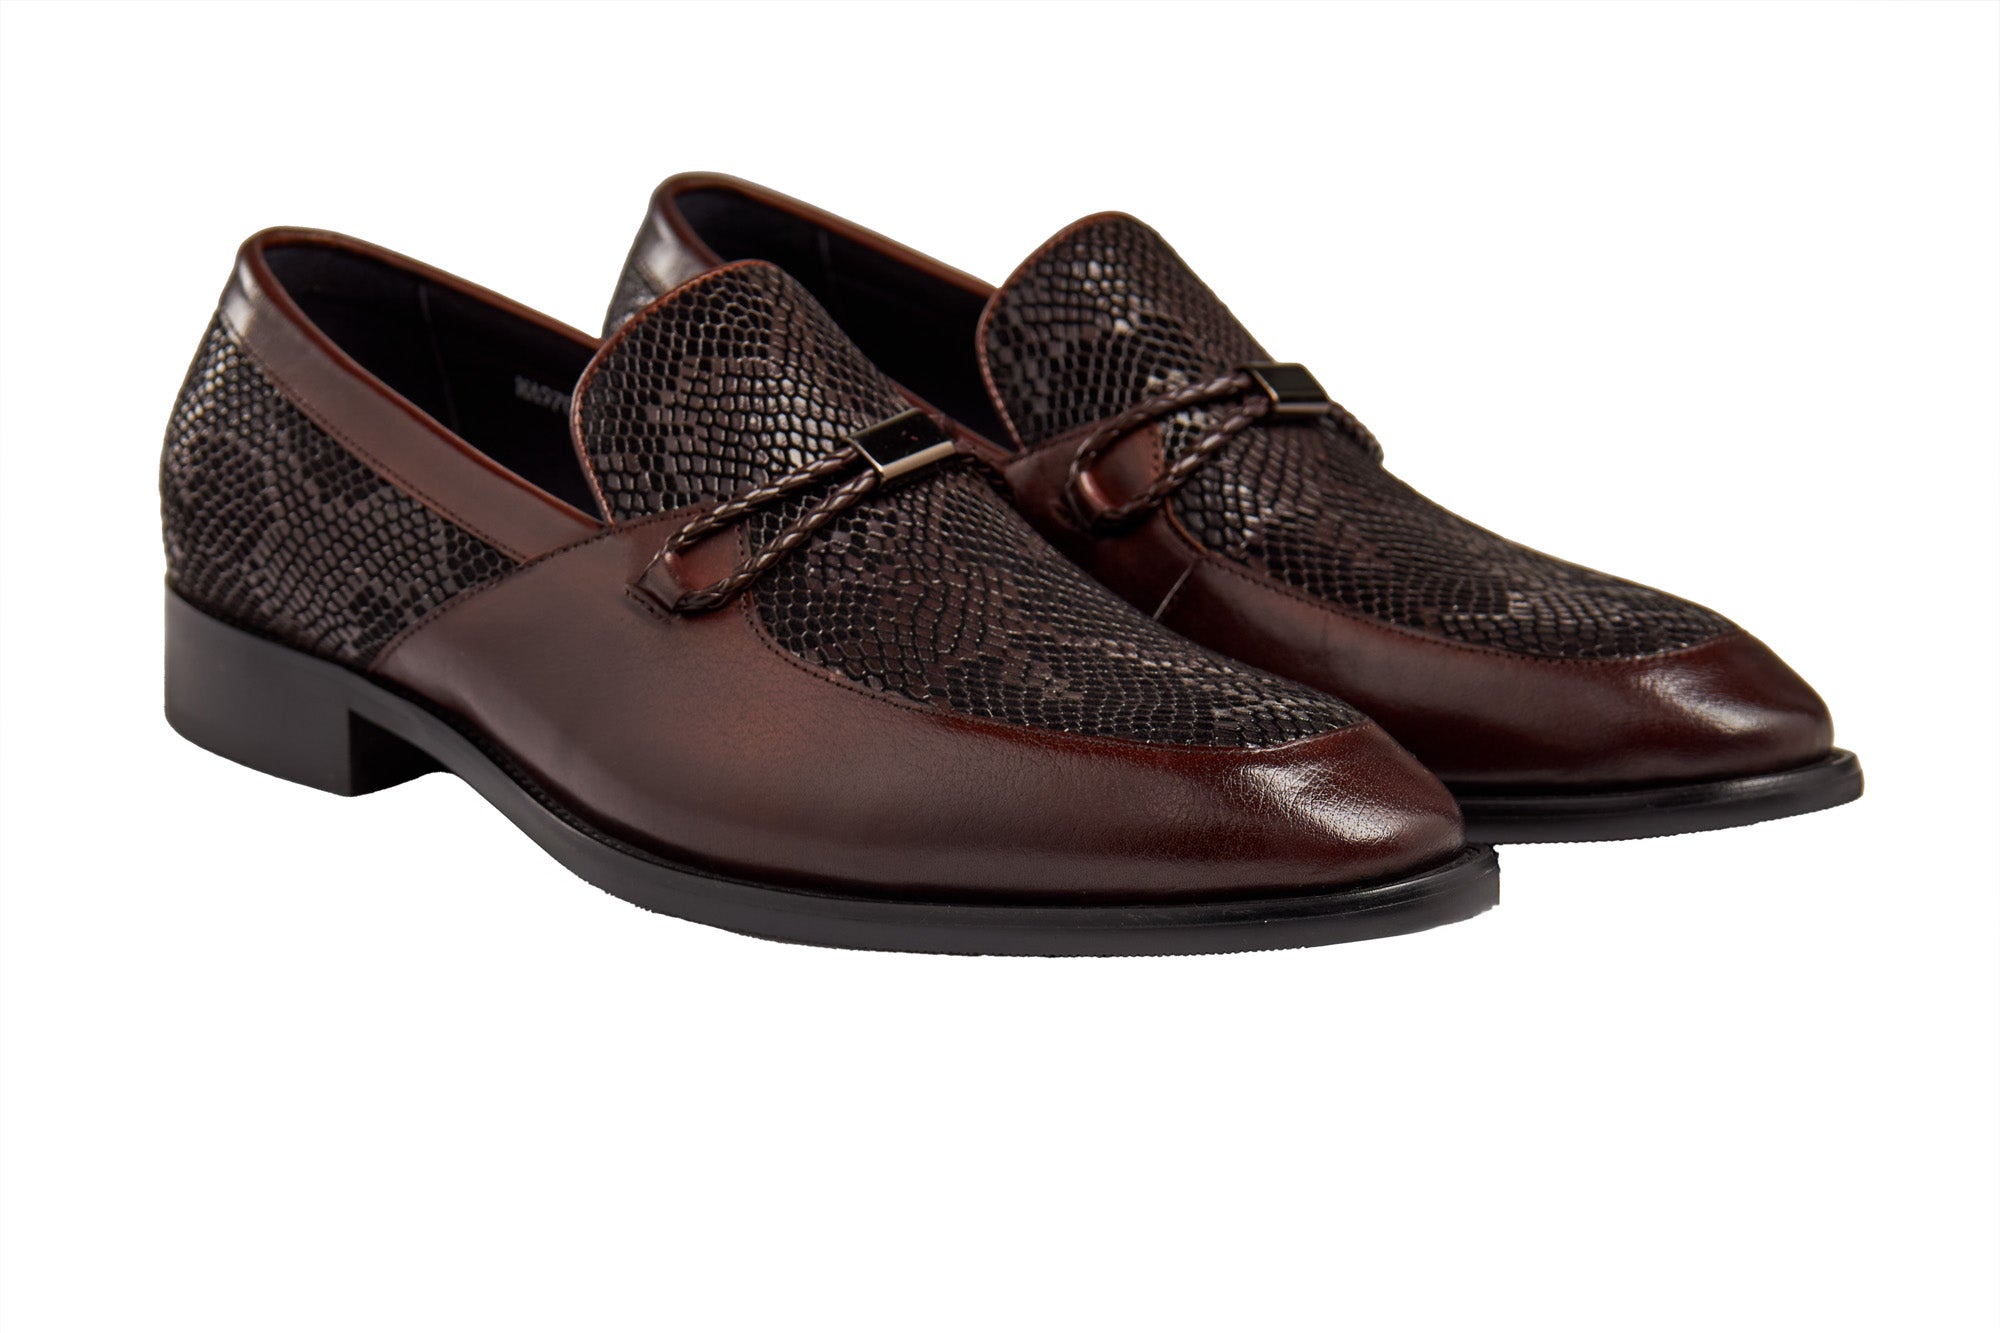 BROWN LEATHER PRINTED LOAFERS